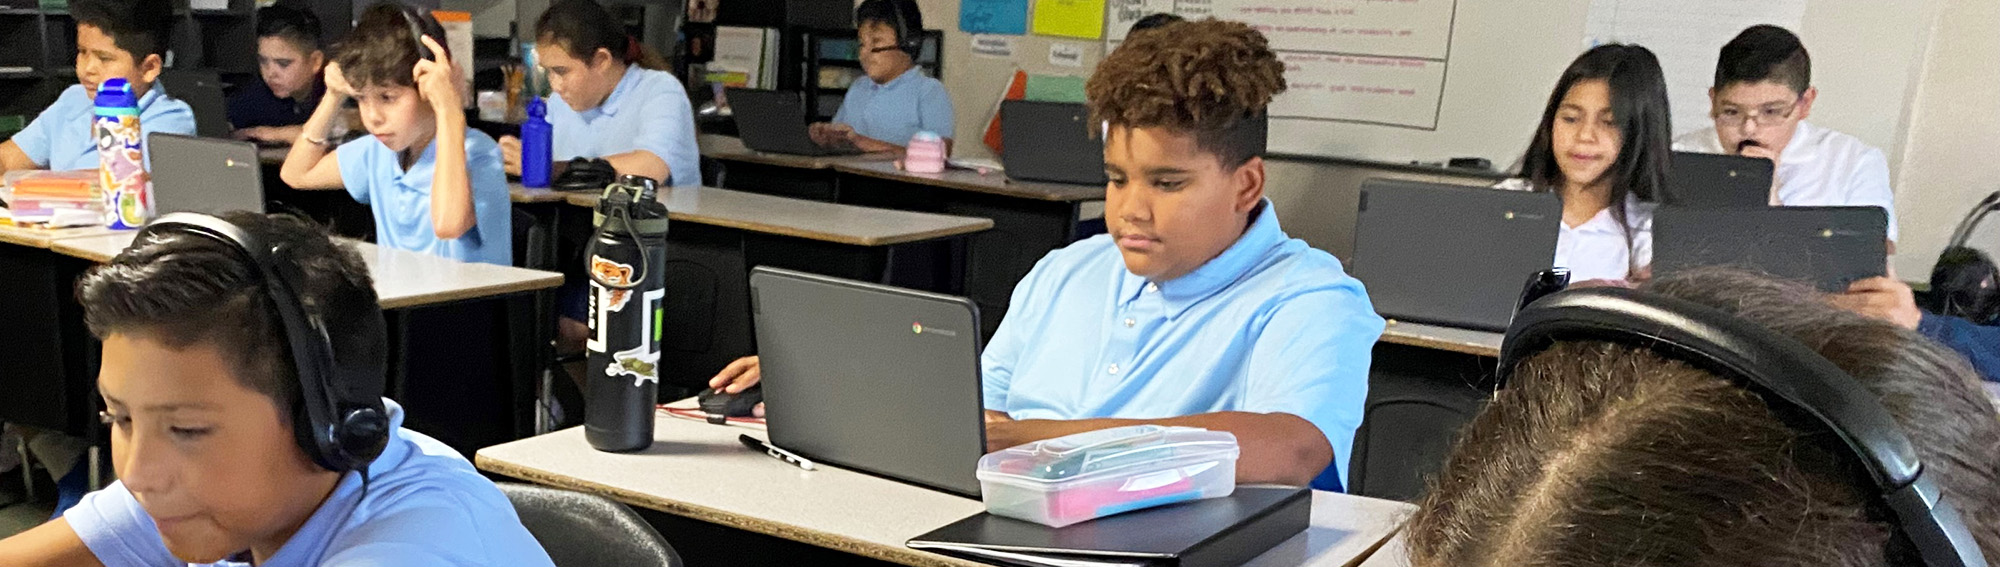 Students focused on learning in the computer lab